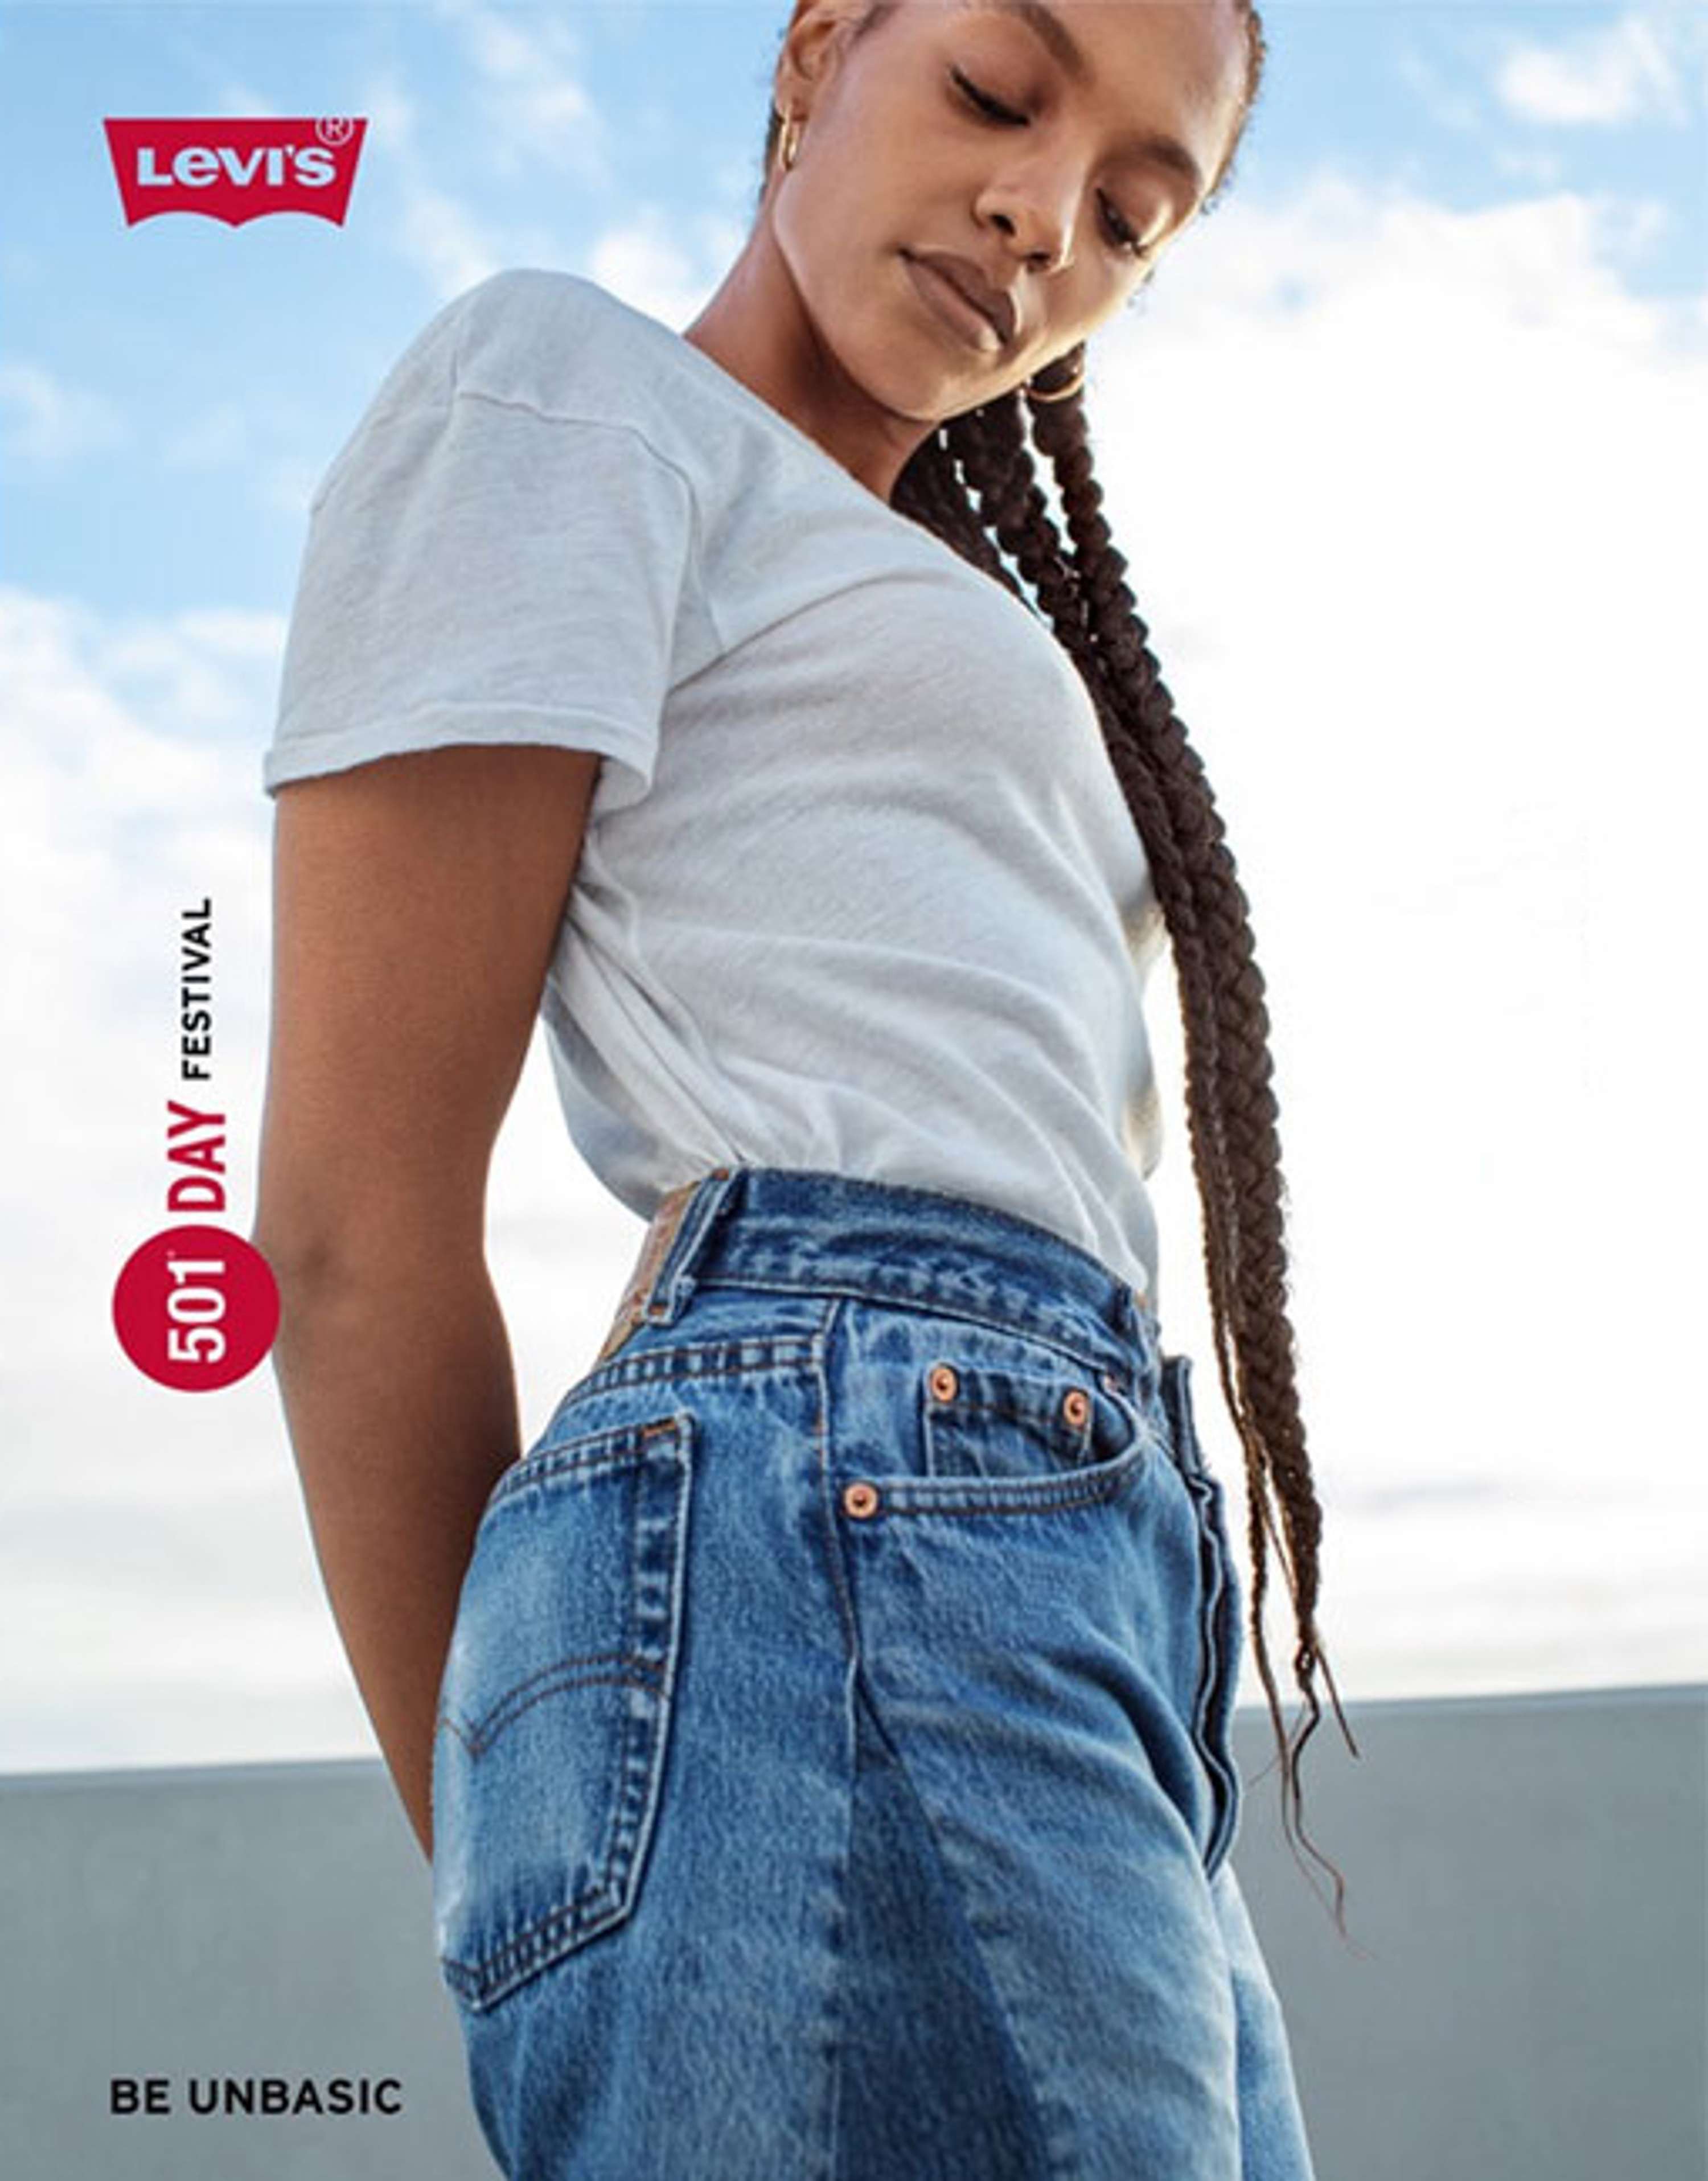 Levi's 501 Day Campaign | The Dots